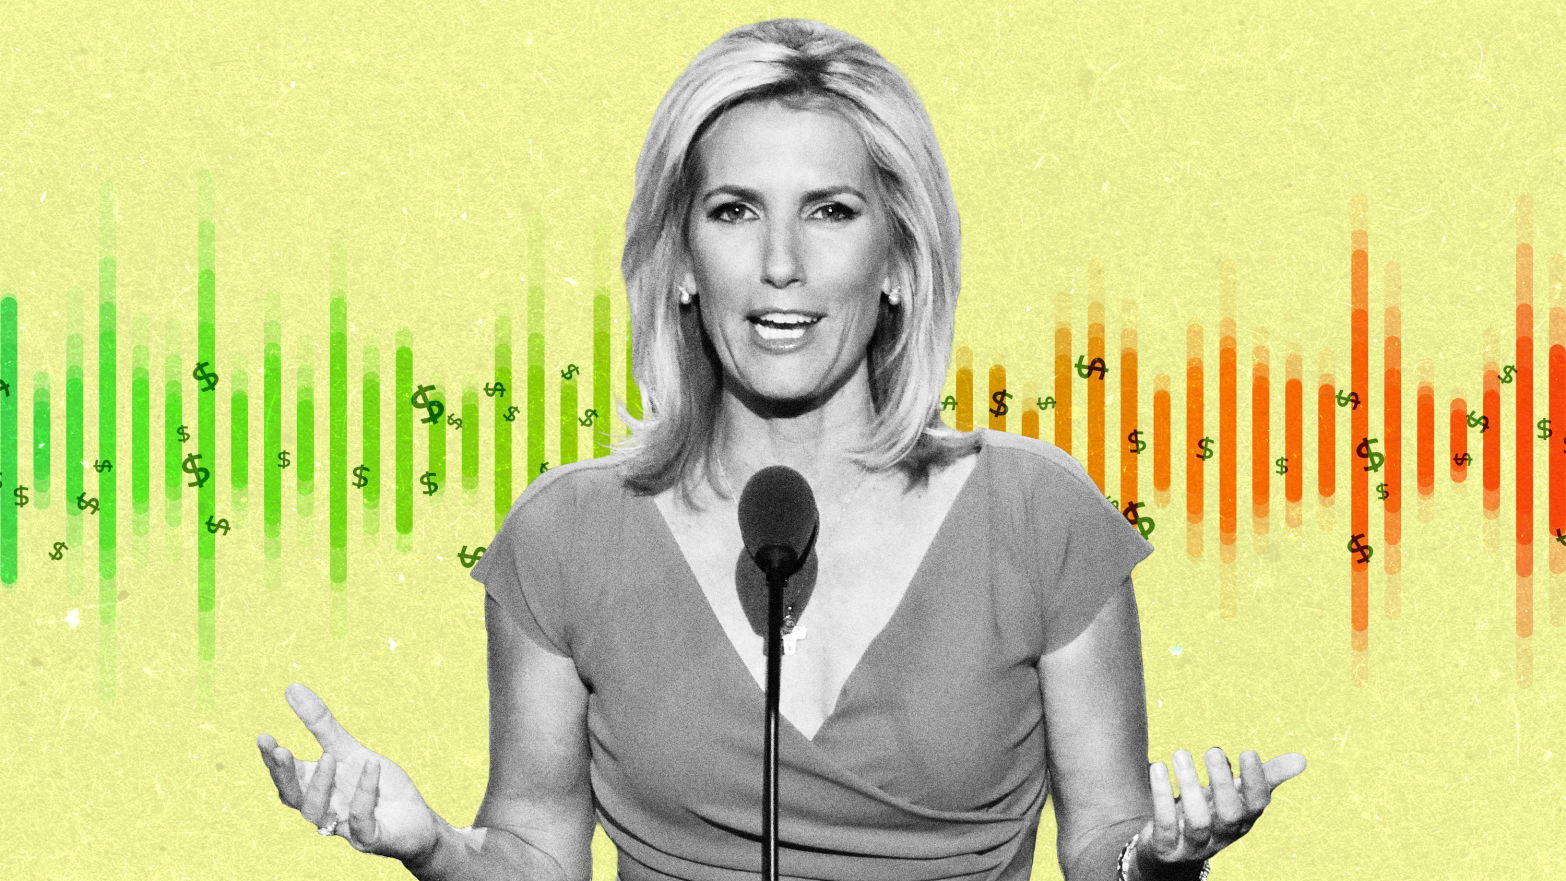 A photo illustration of Laura Ingraham with a sound wave and dollar sign background.